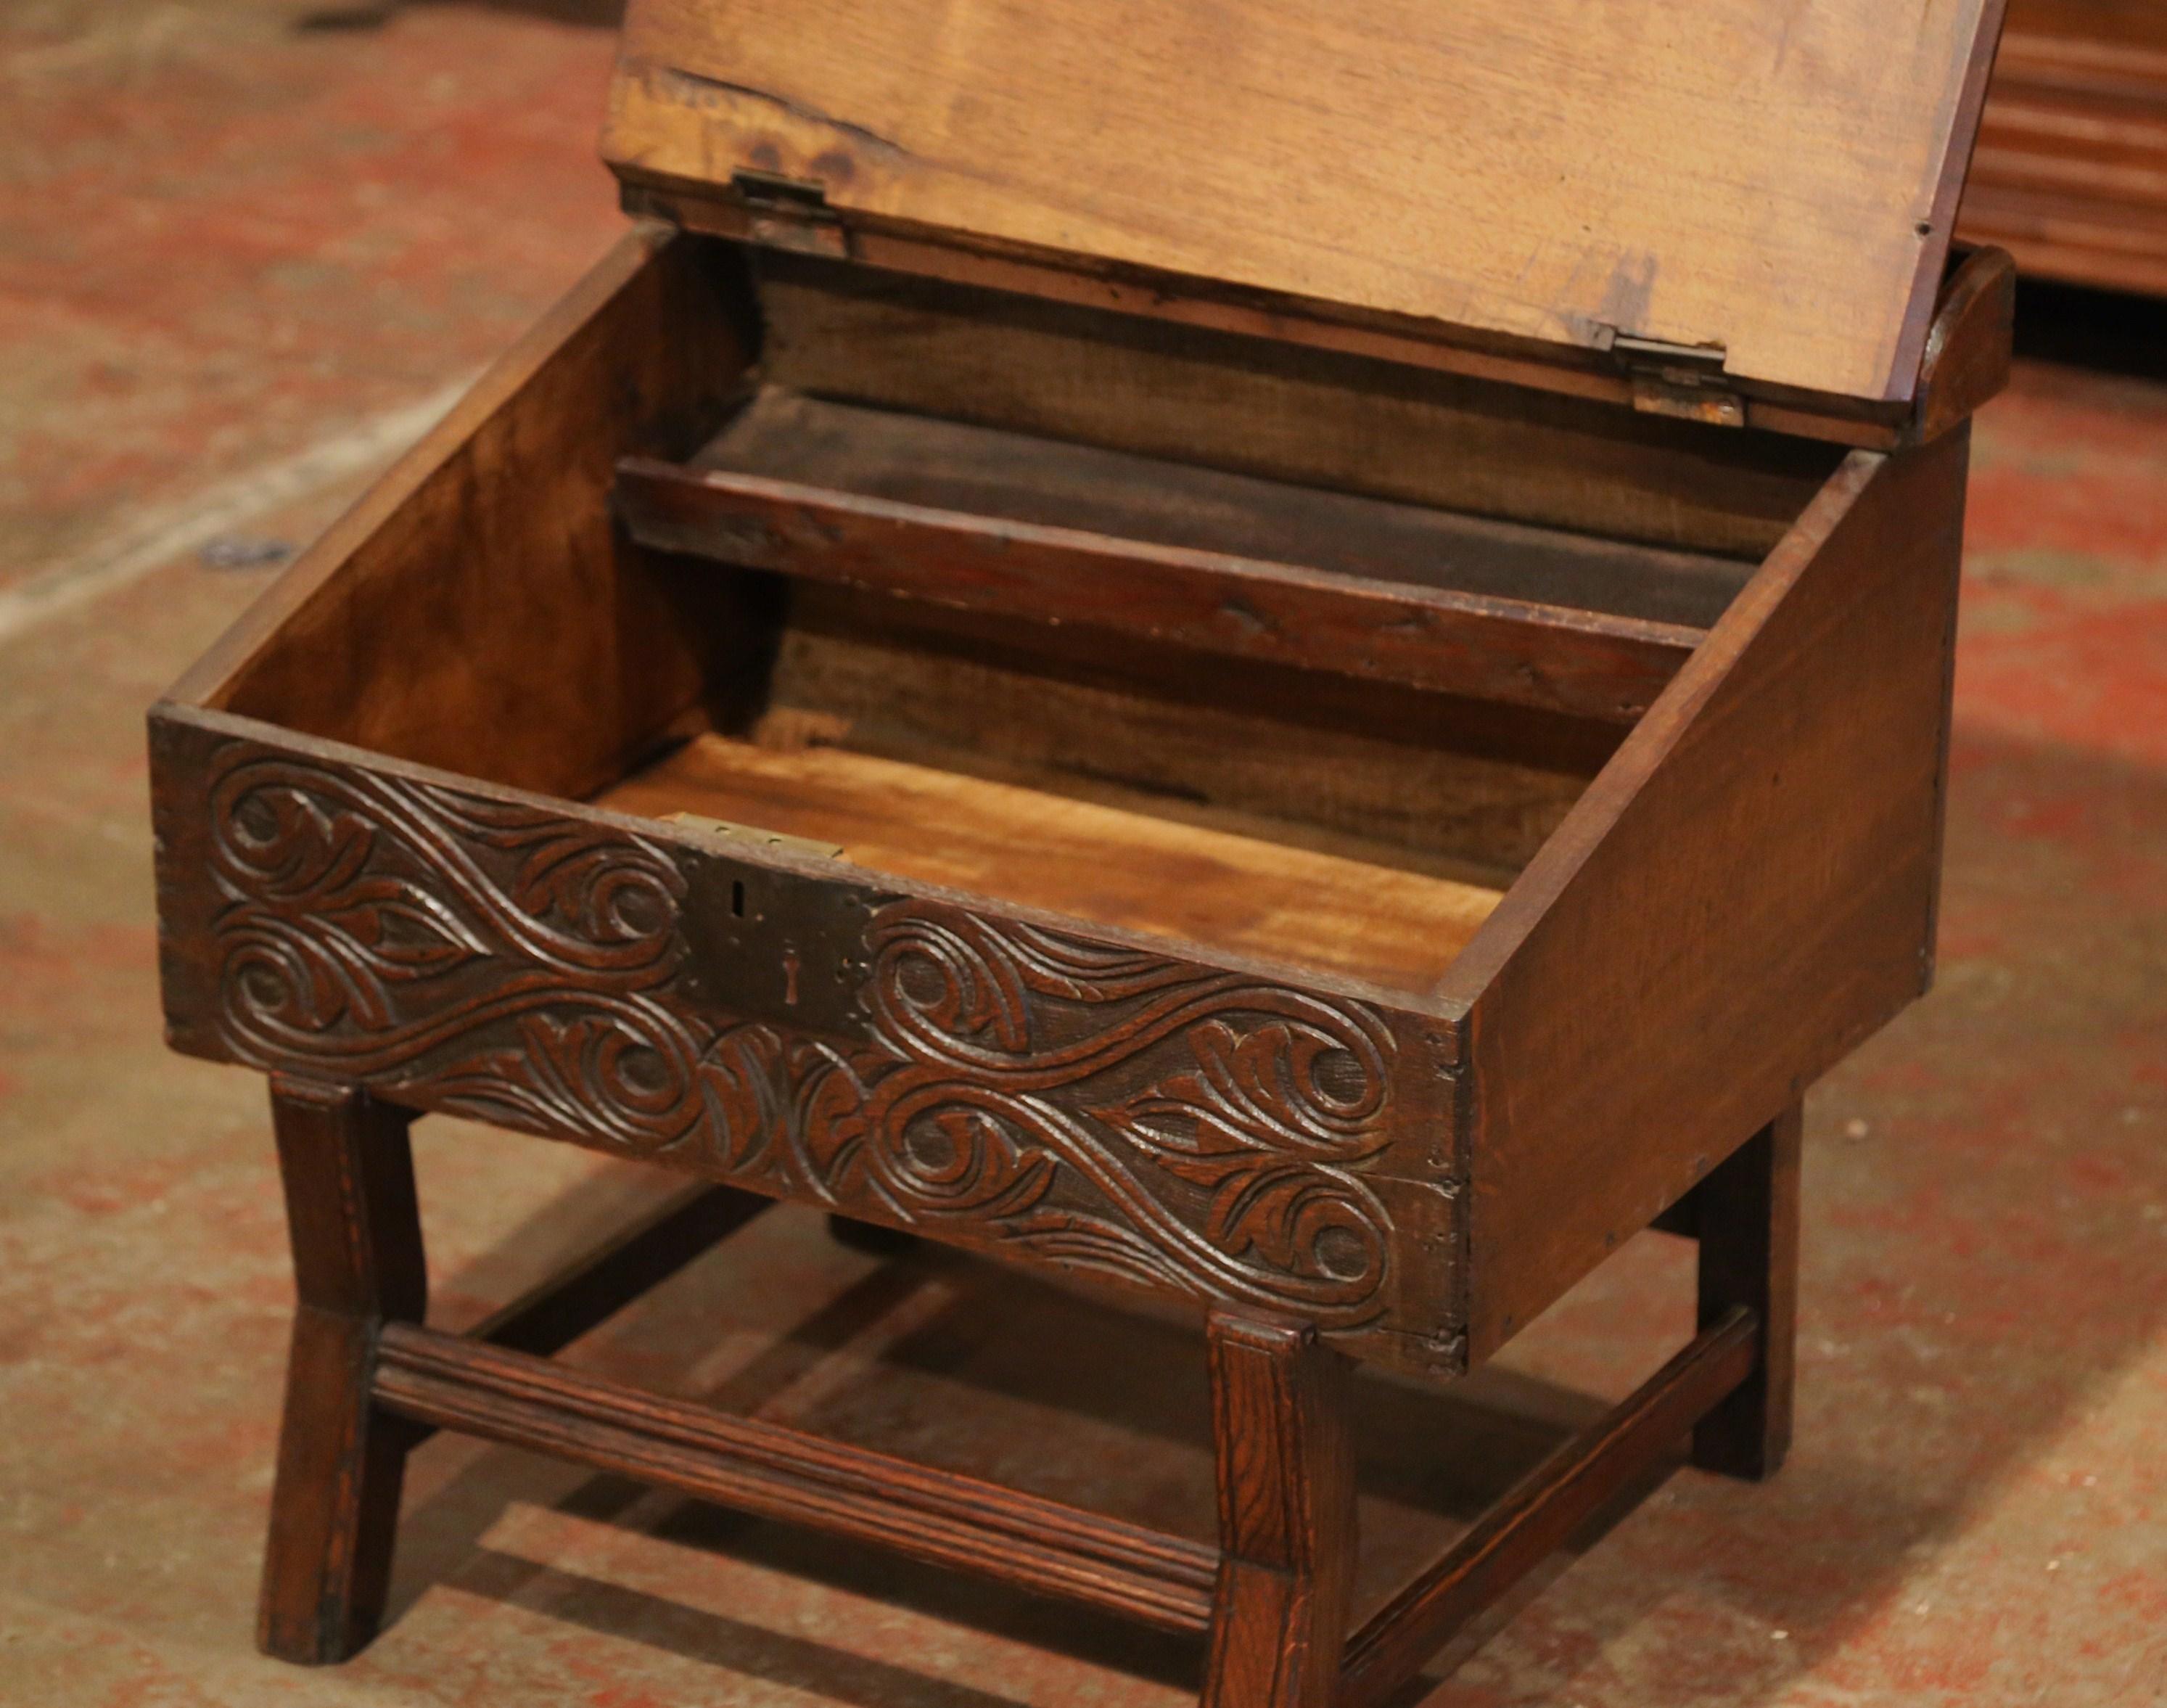 Patinated 18th Century French Carved Walnut Desk on Legs with Slant Top and Inside Storage For Sale